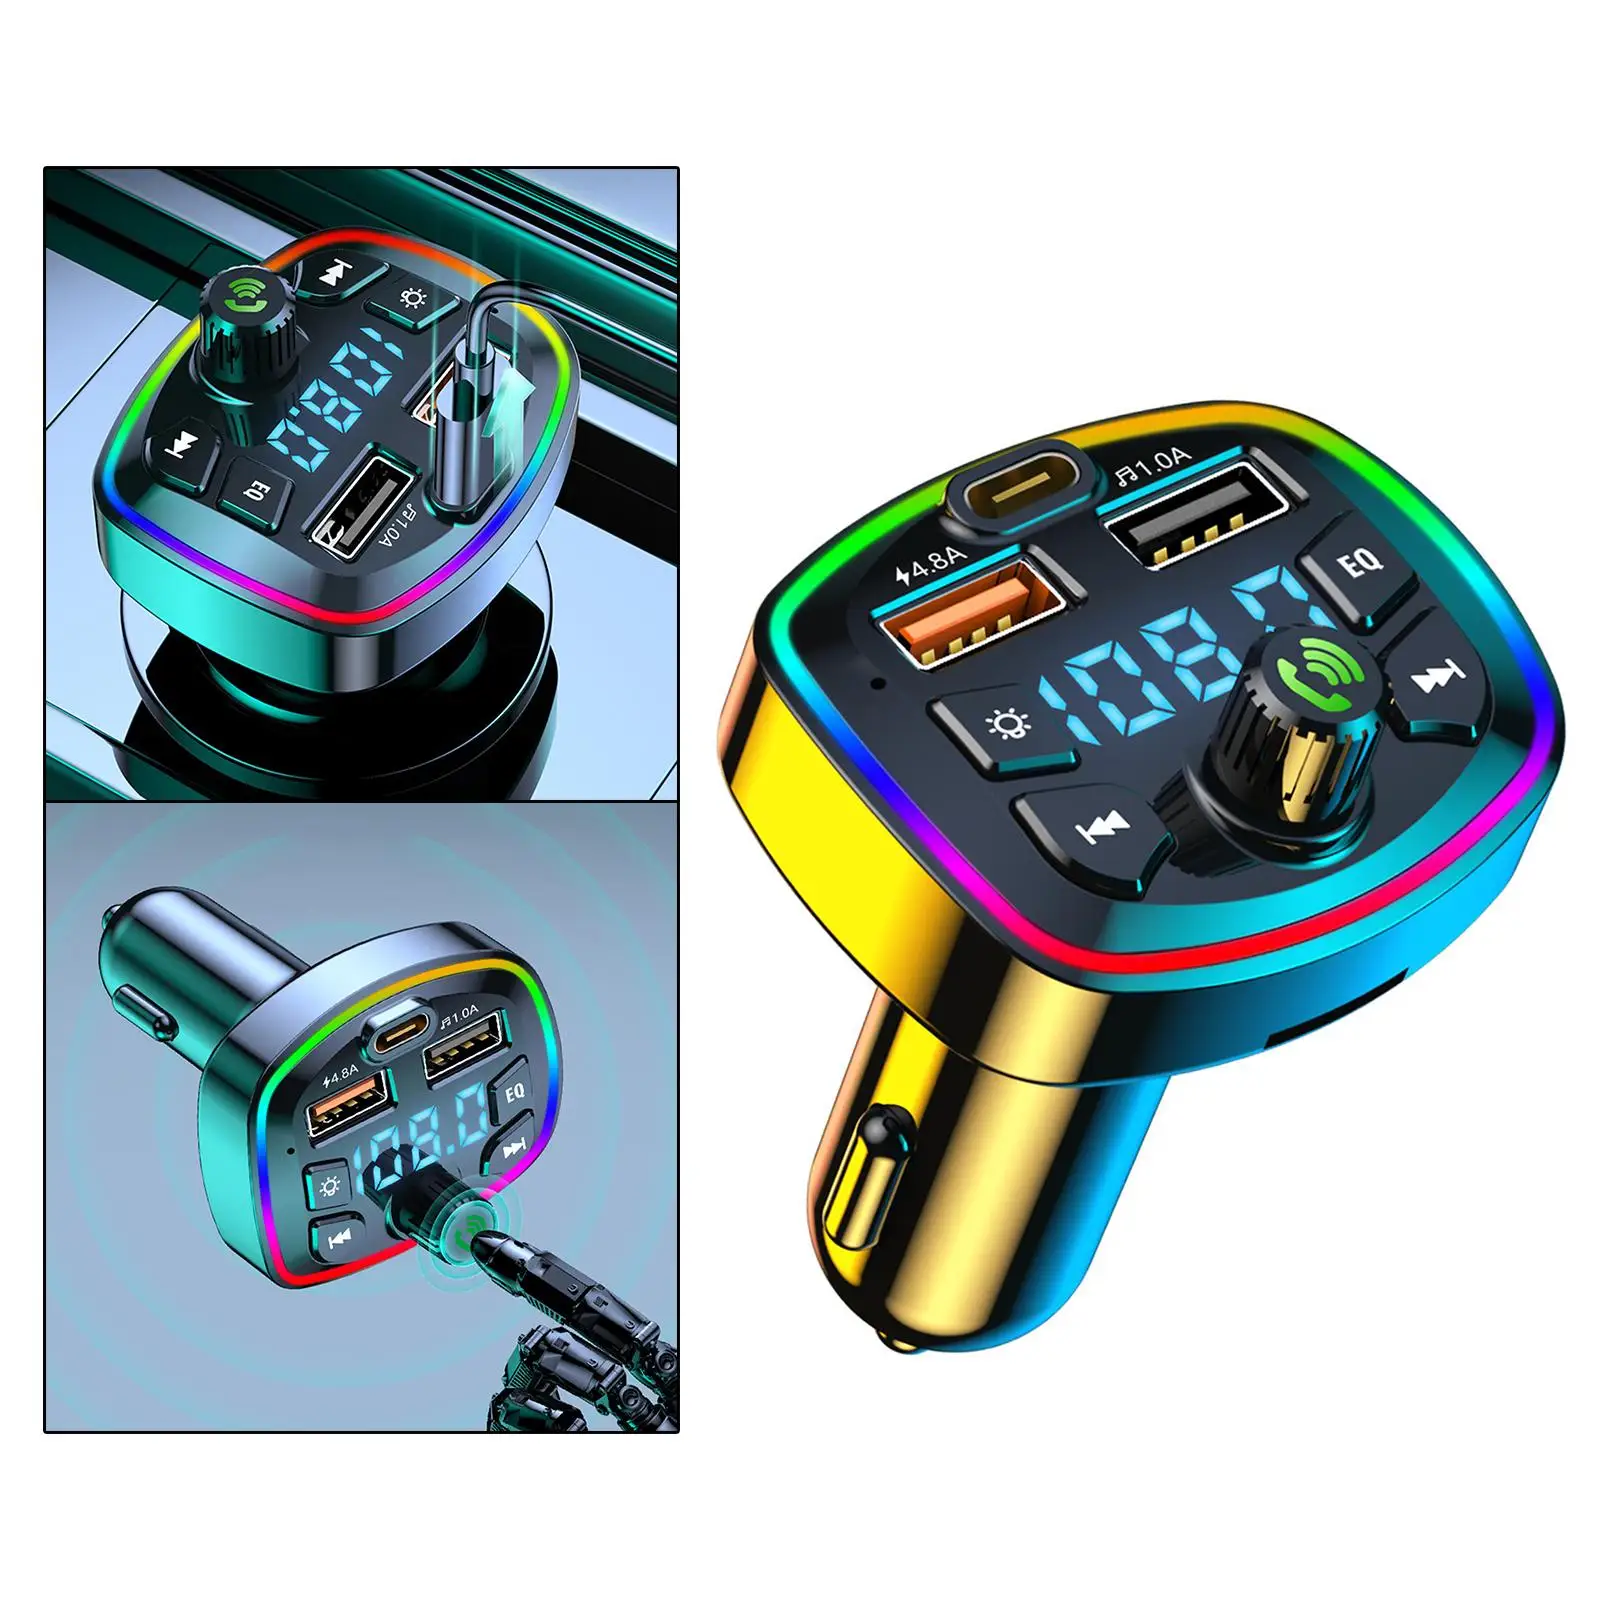 Bluetooth FM Transmitter Type-C PD Support Hands-Free Call Support TF Card & USB Disk Adapter